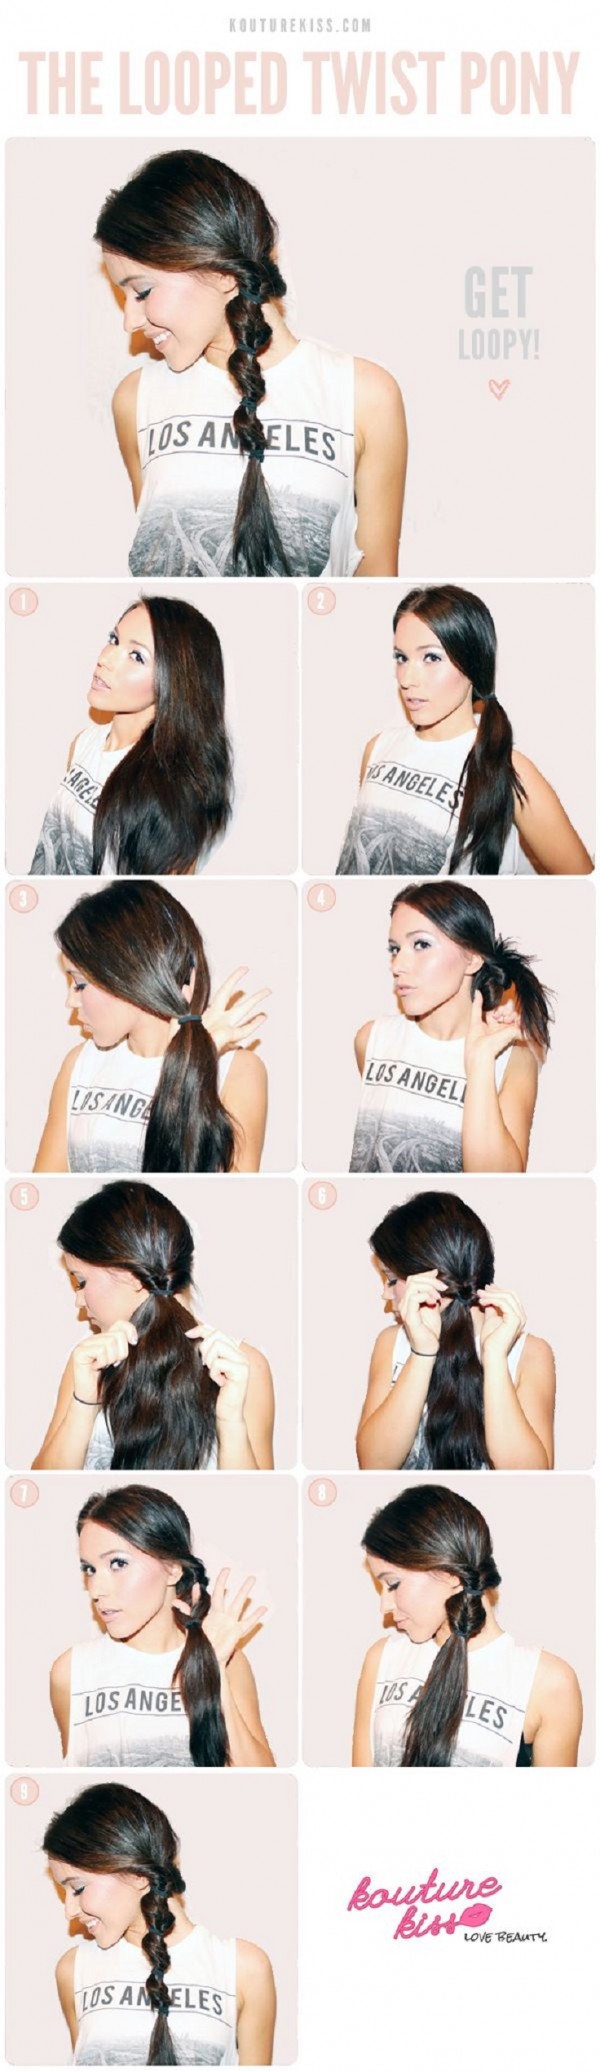 5 minutes hairstyles10